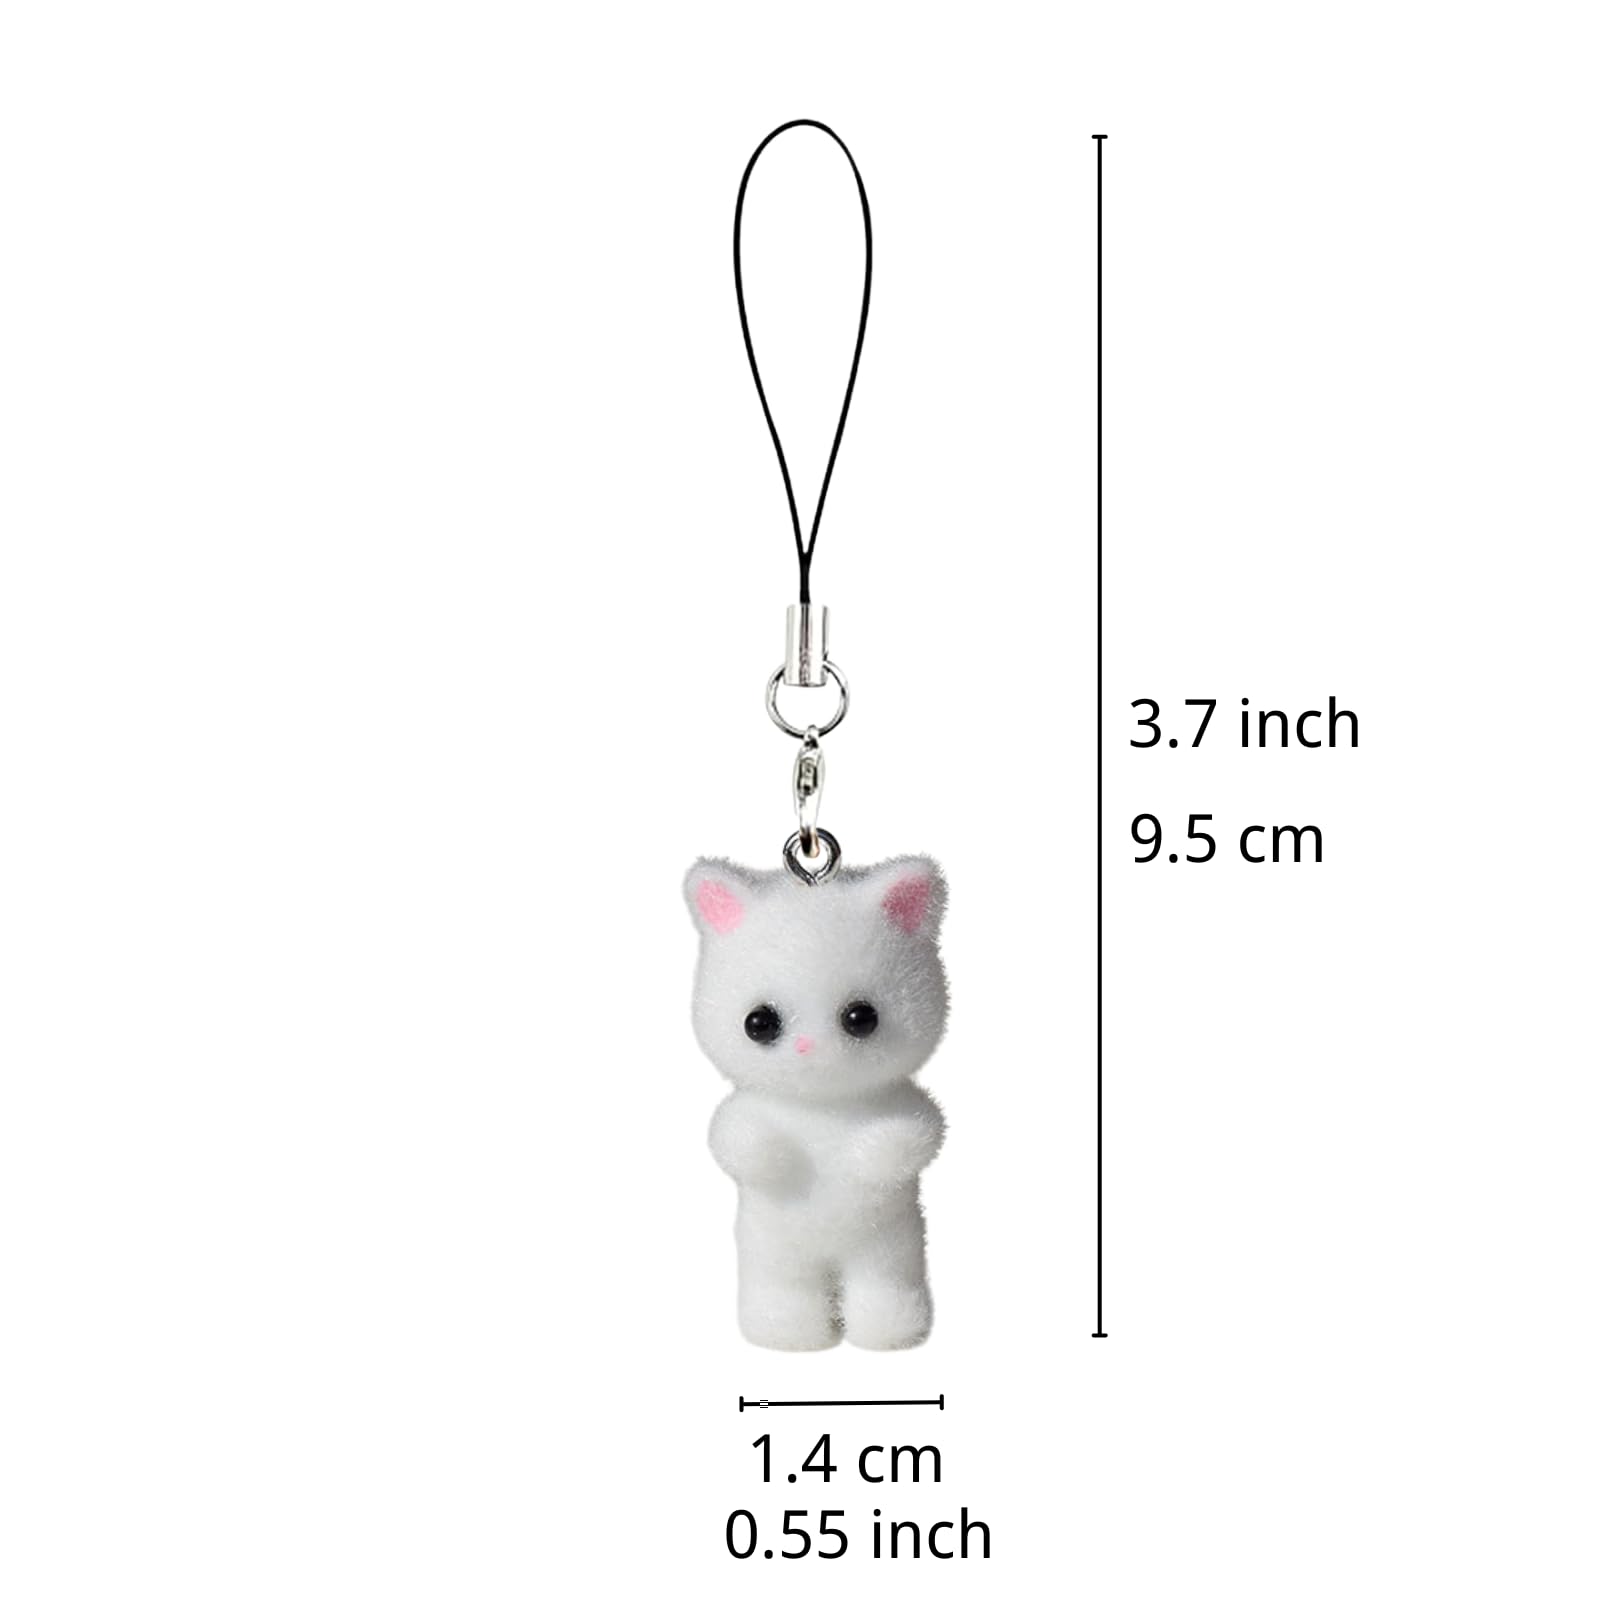 Cat Phone Charm Y2K Cute Acrylic Aesthetic Kawaii Cat Cell Charms Chain Wrist Strap Lanyard Accessories for Bag Backpack Keychain Camera Pendants Decor